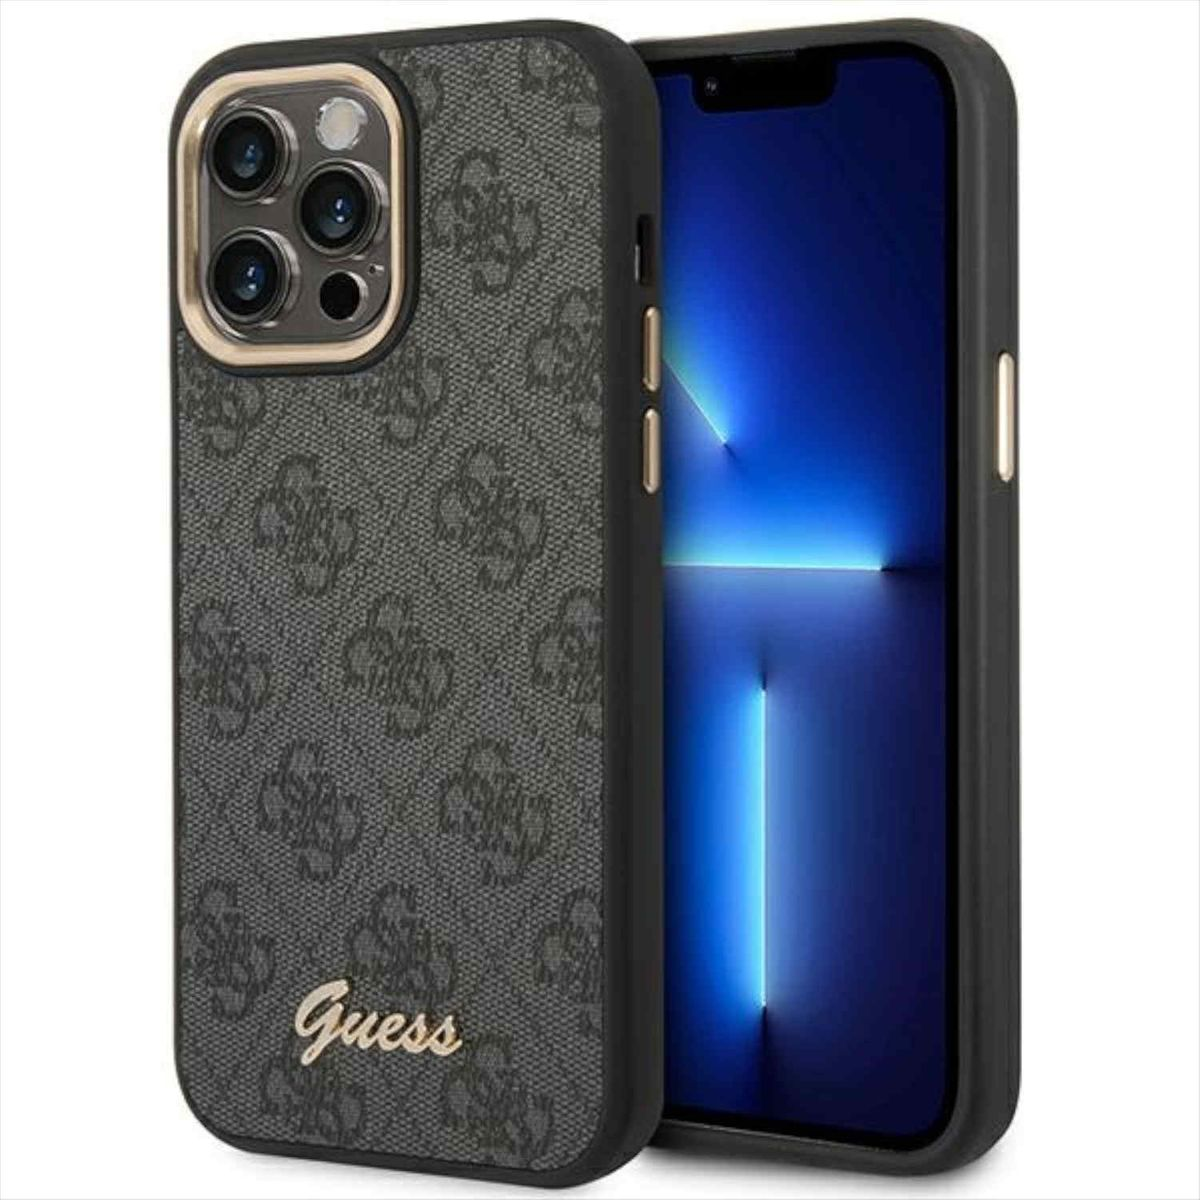 GUESS Apple, Outline Full Multicolor Max, 14 Pro Metal Cover, iPhone (Schwarz), Camera Guess Pro Case - 4G Max iPhone 14 Hülle für